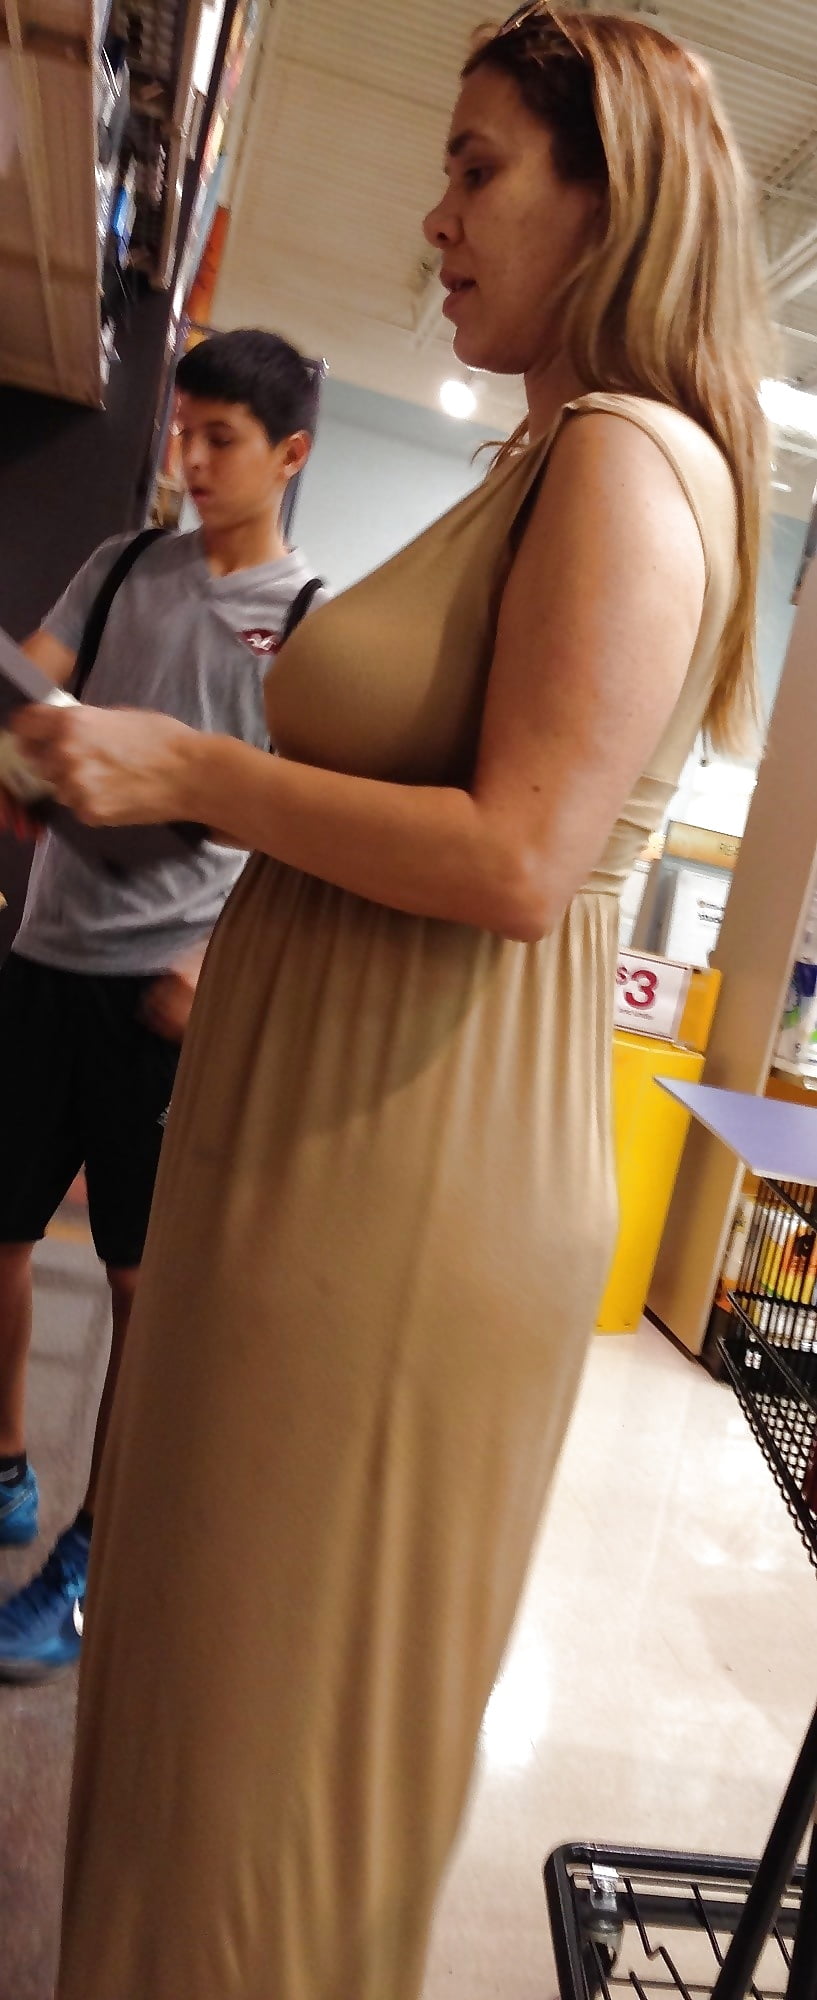 817px x 2000px - Candid busty Latina milf with pokies shopping porn gallery 193747044